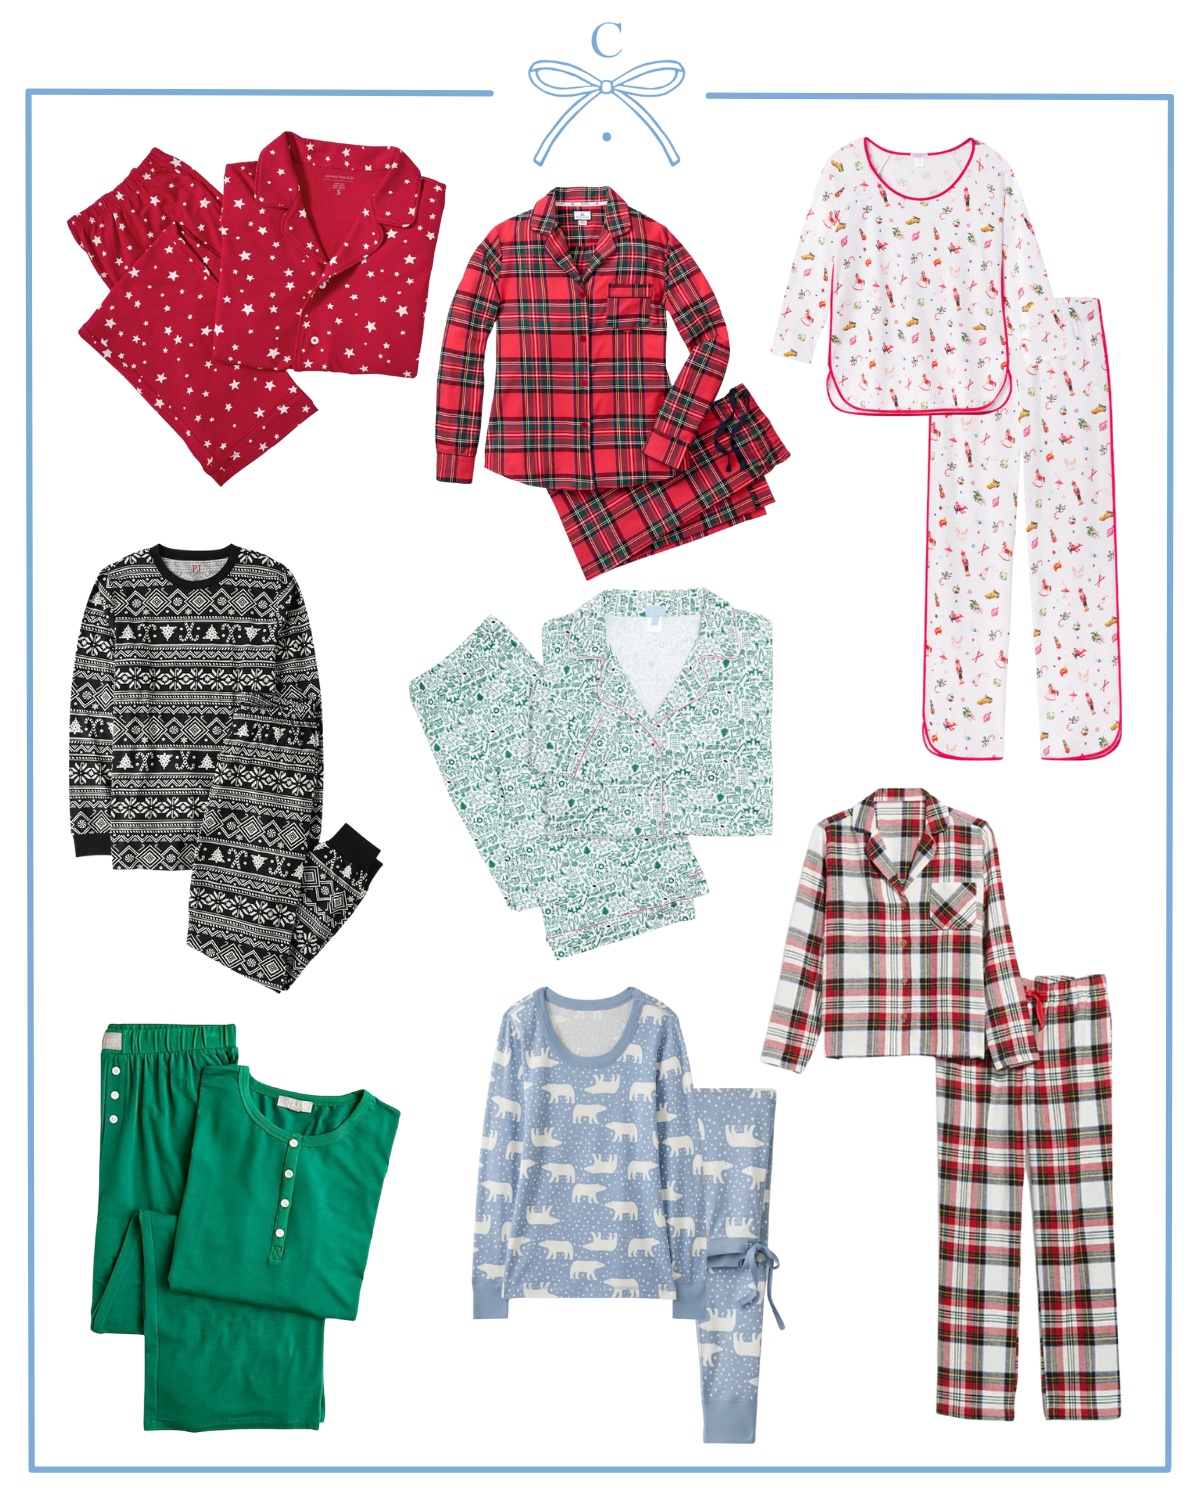 cutest christmas pajamas from pottery barn, petite plume, lake pajamas, the children's place, joy street kids, j.crew, hanna andersson, and old navy